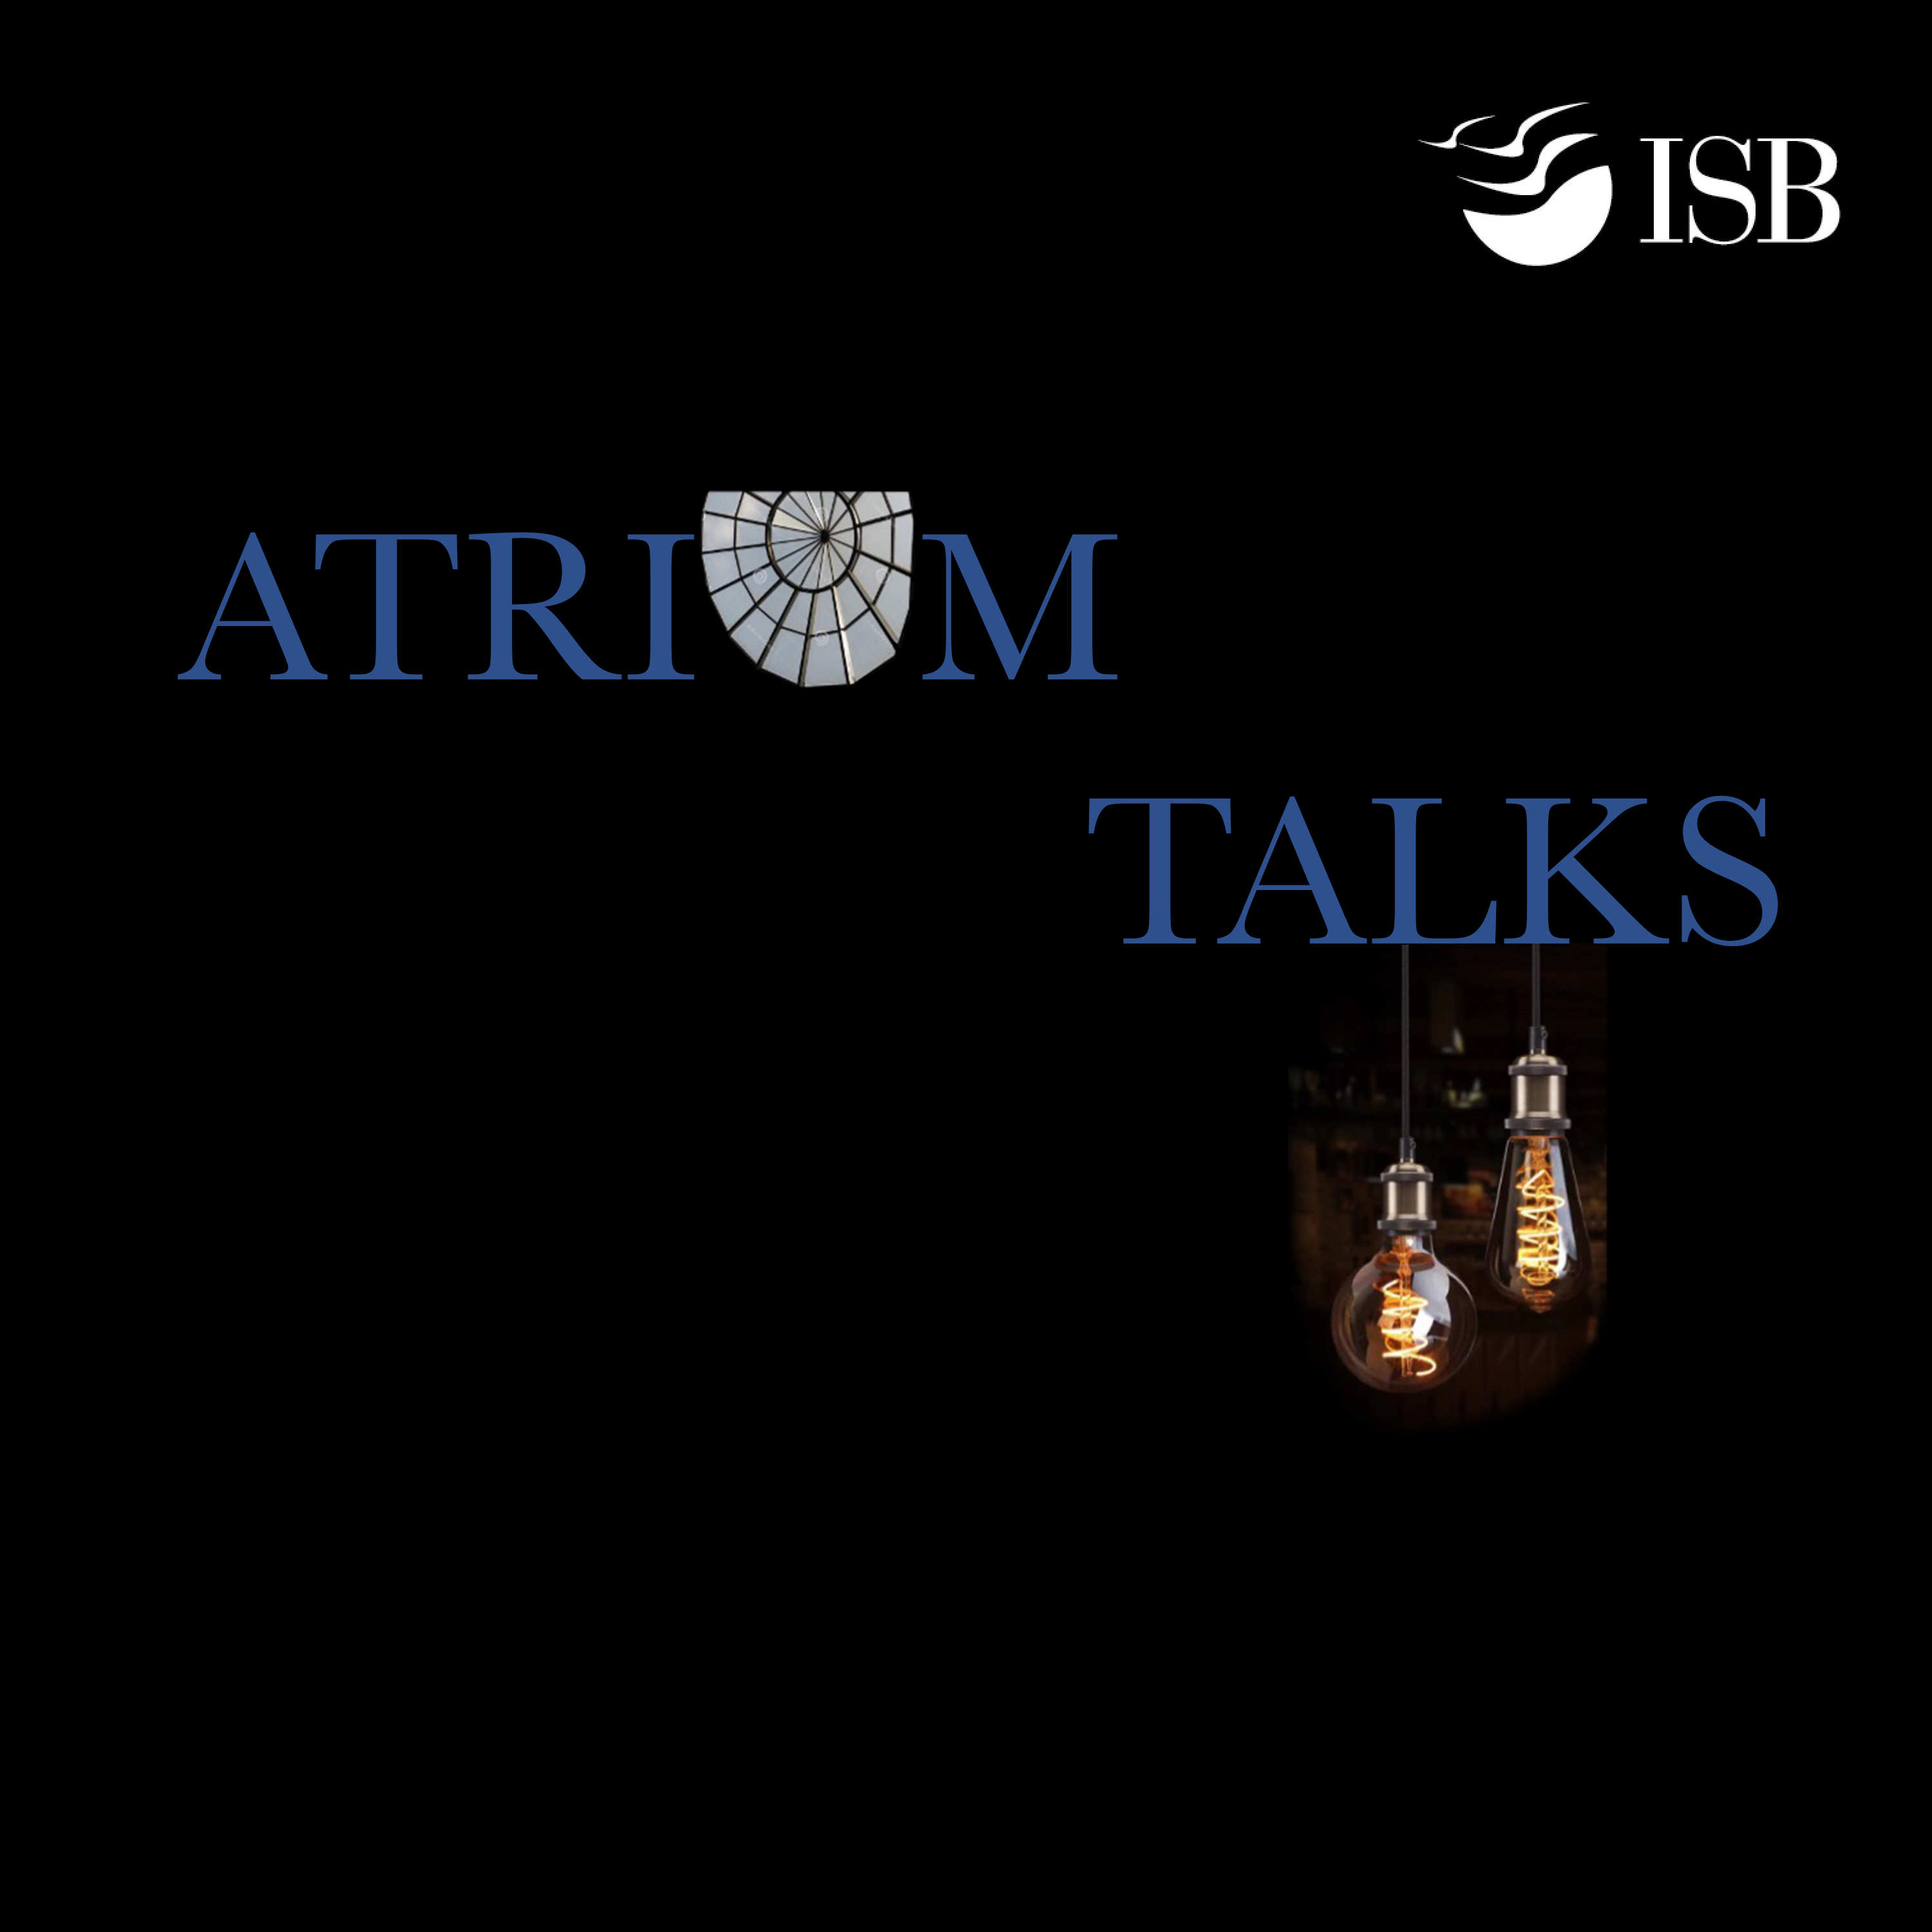 Artwork for Atrium Talks by Indian School of Business (ISB)